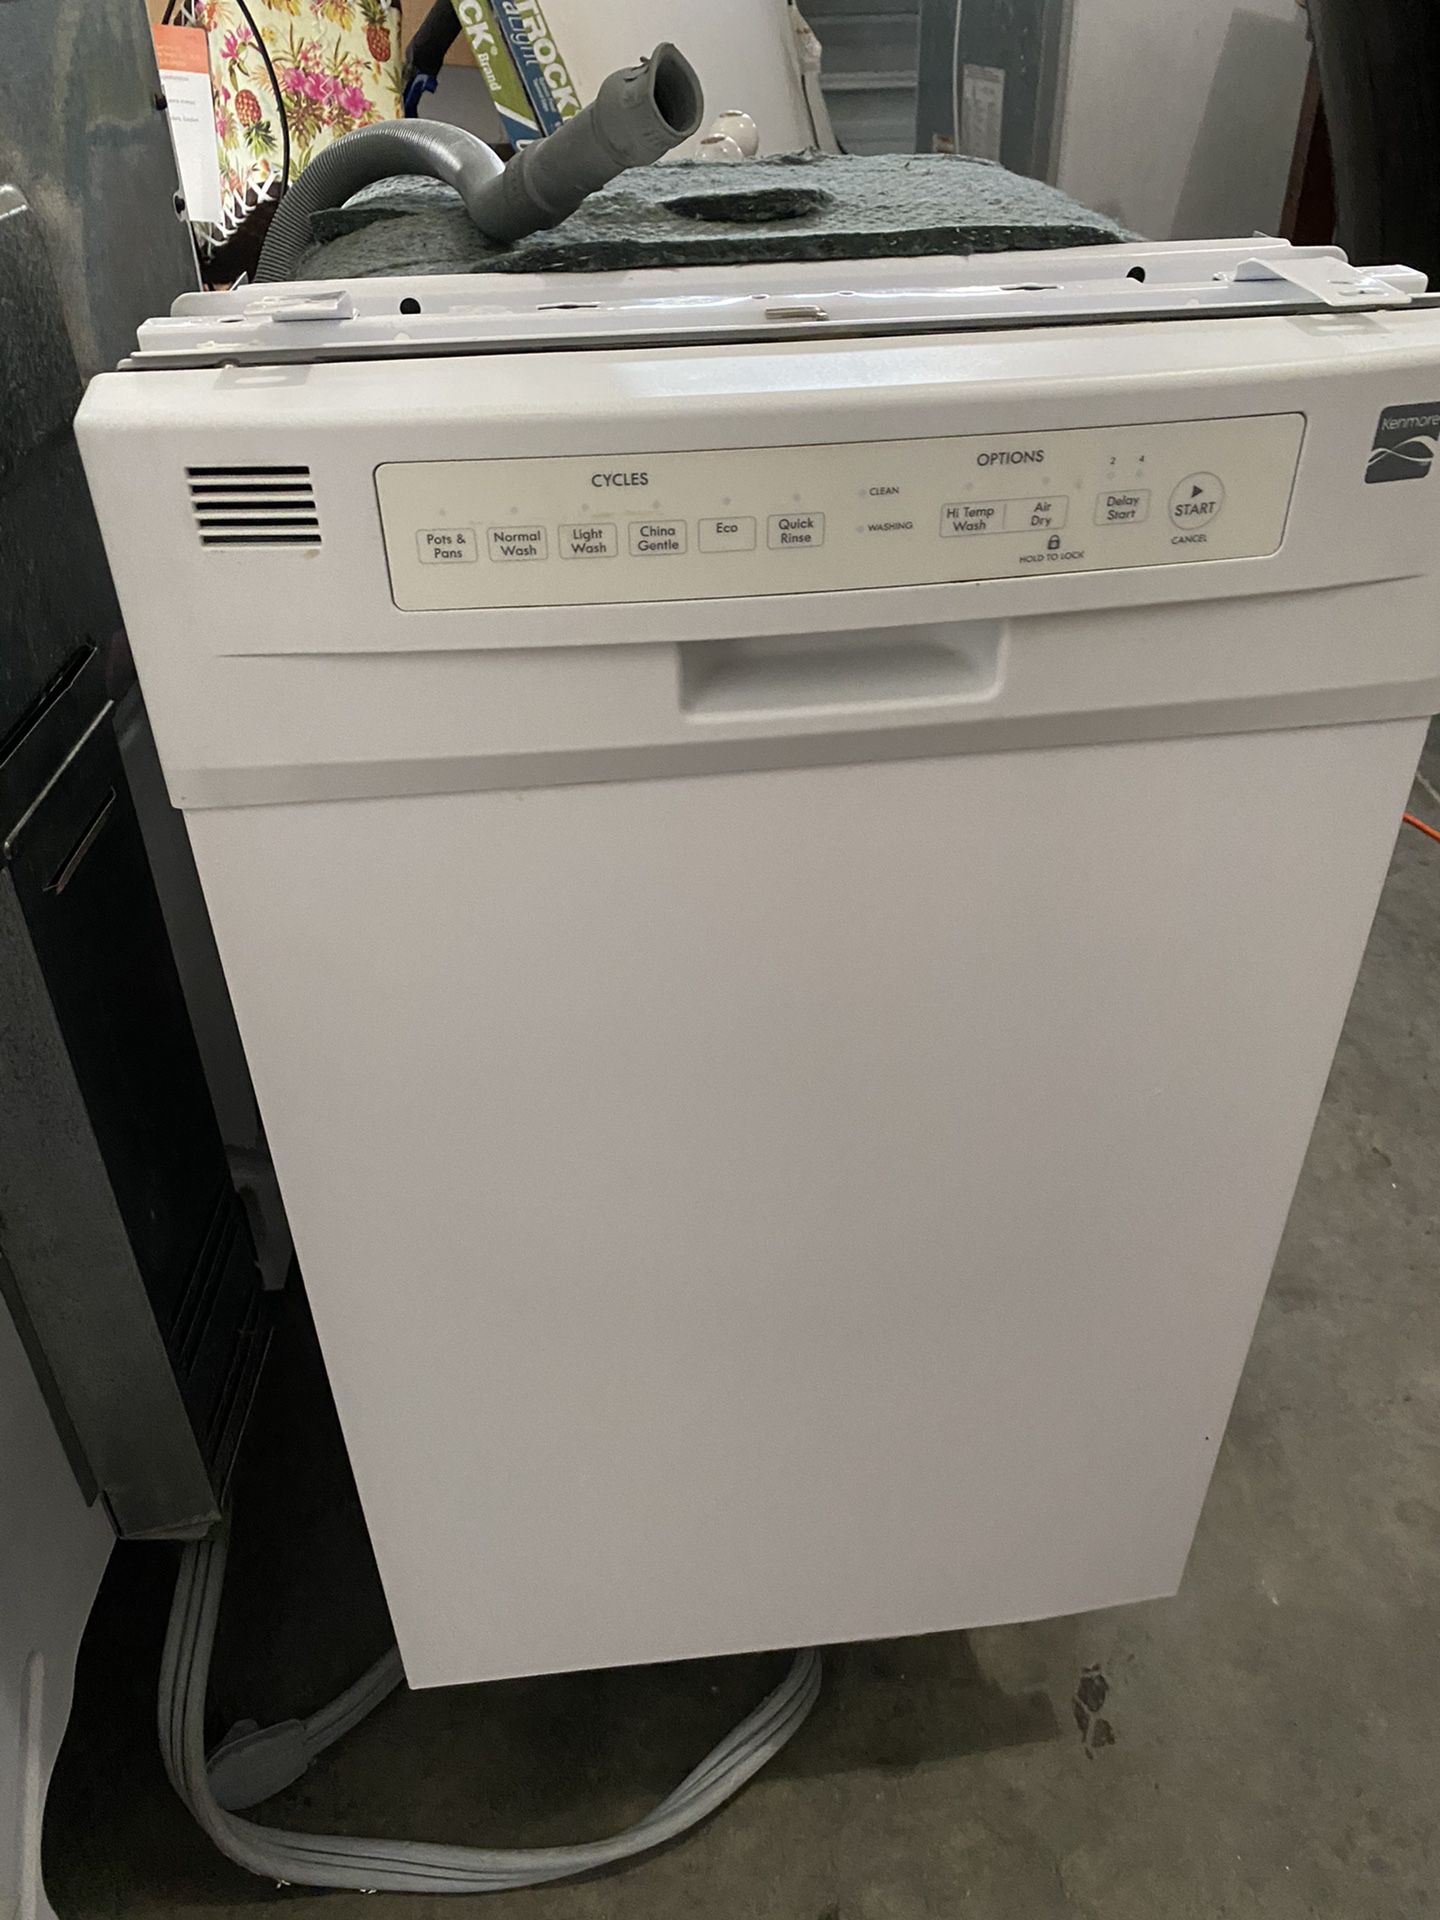 Dishwasher 18 inch stainless steel inside